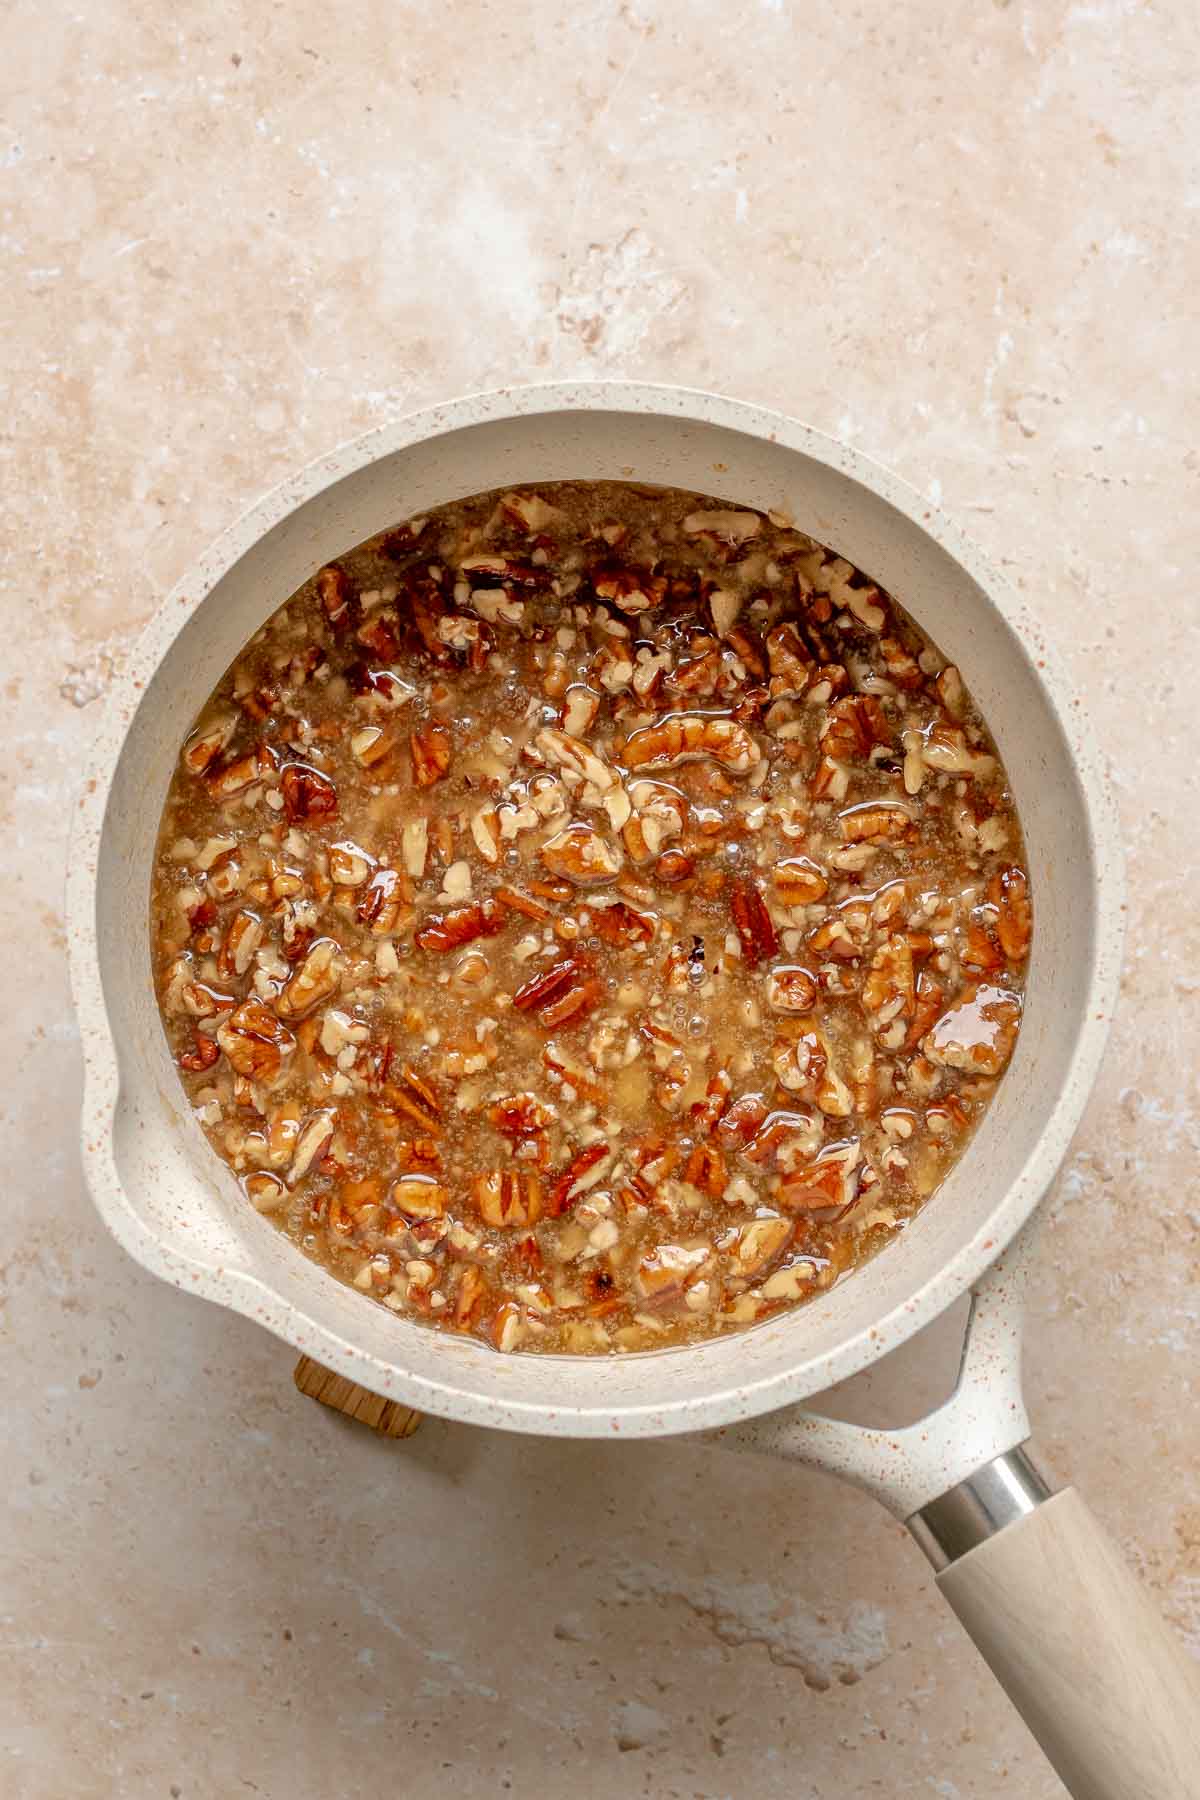 Pecans and syrup in a saucepan.